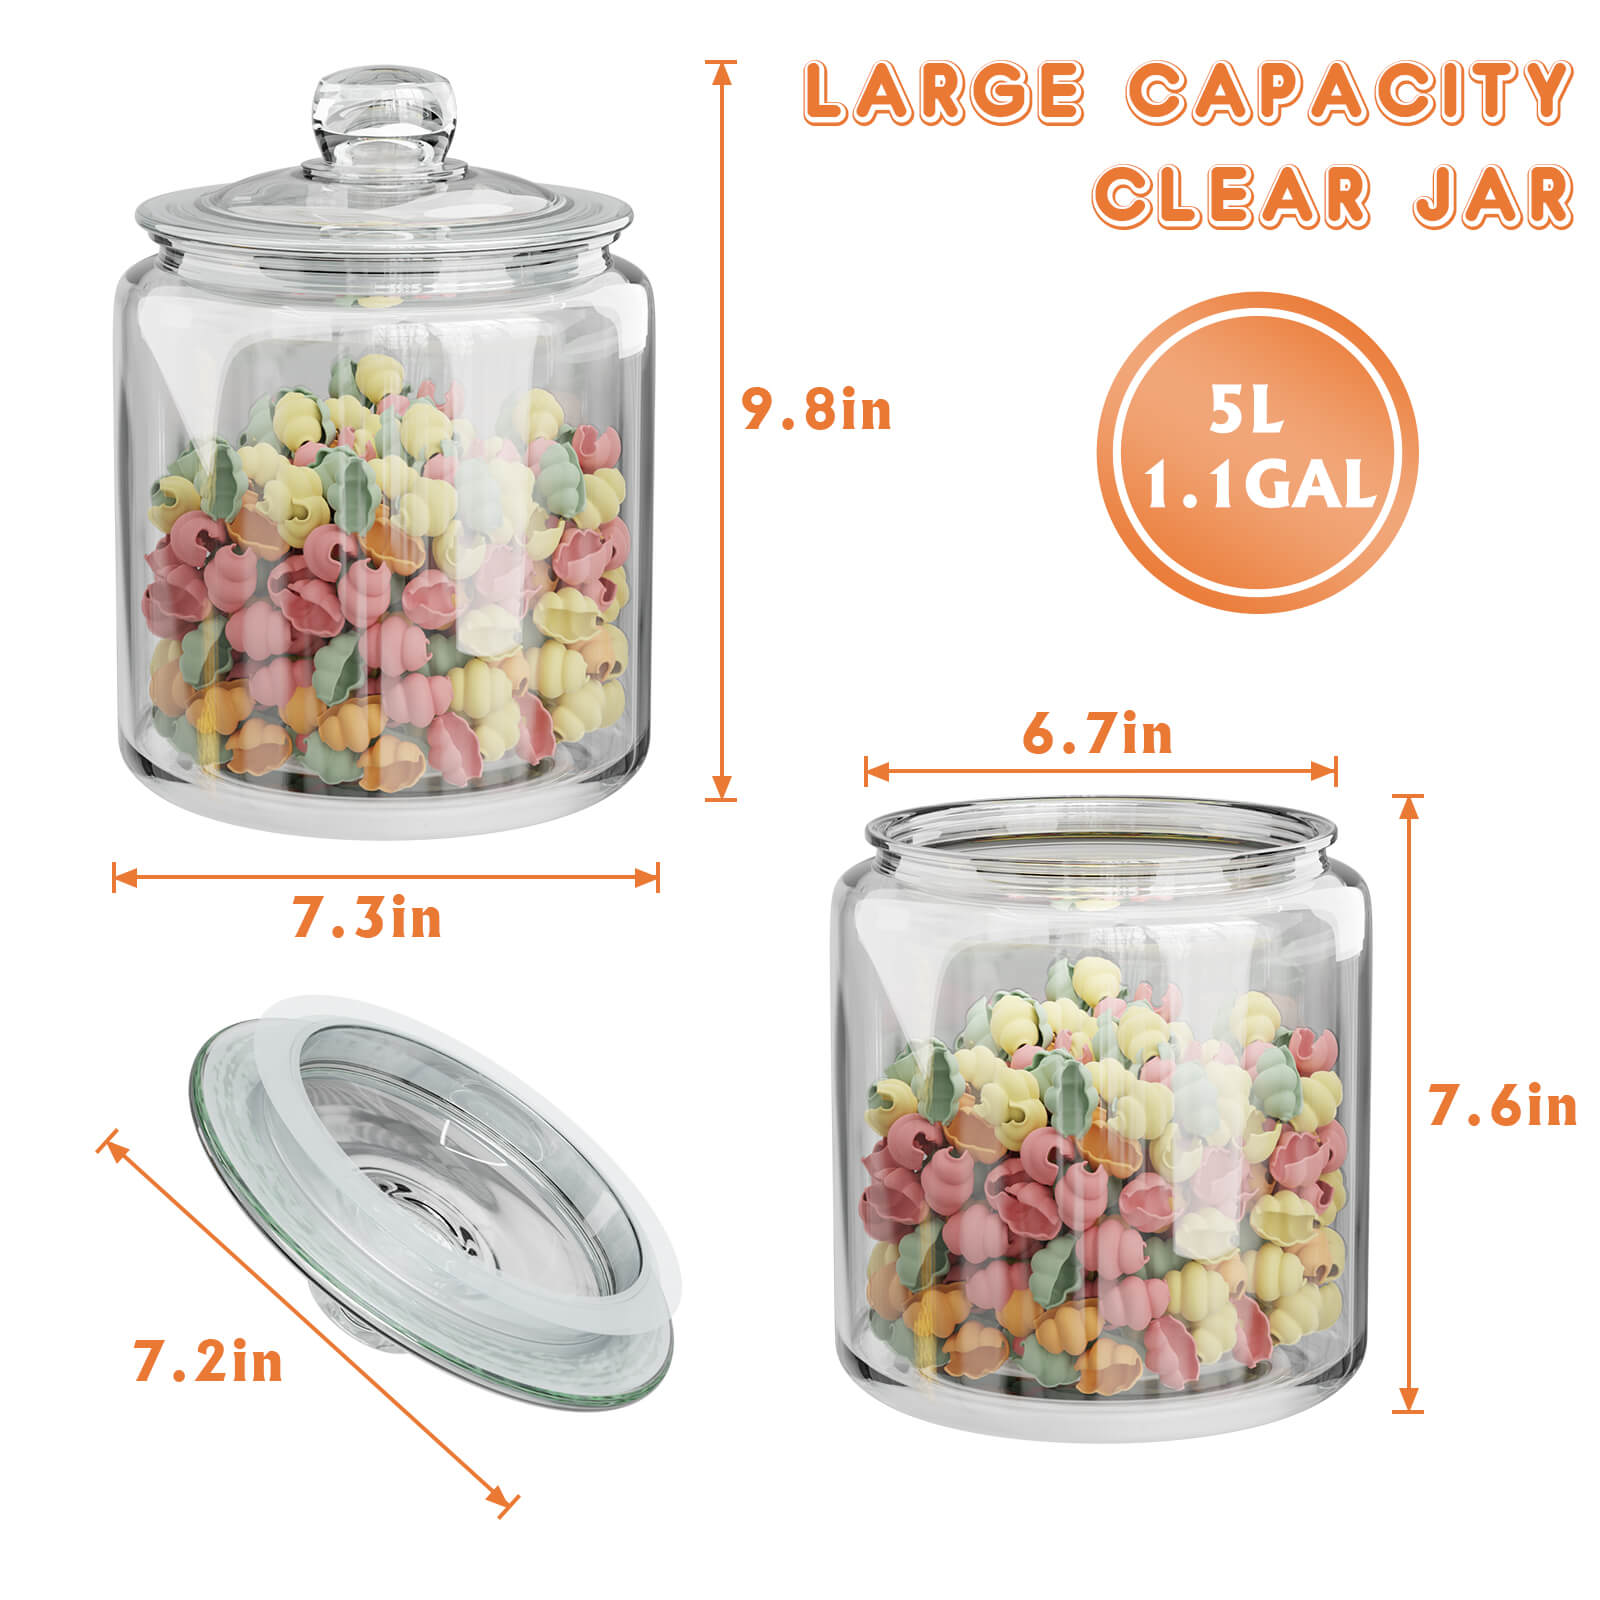 Masthome 1 Gallon Glass Storage Jar, Wide Mouth, Clear Glass Cookie Jars  with Airtight Lids, Dishwasher Safe, Kitchen Food Storage Container for